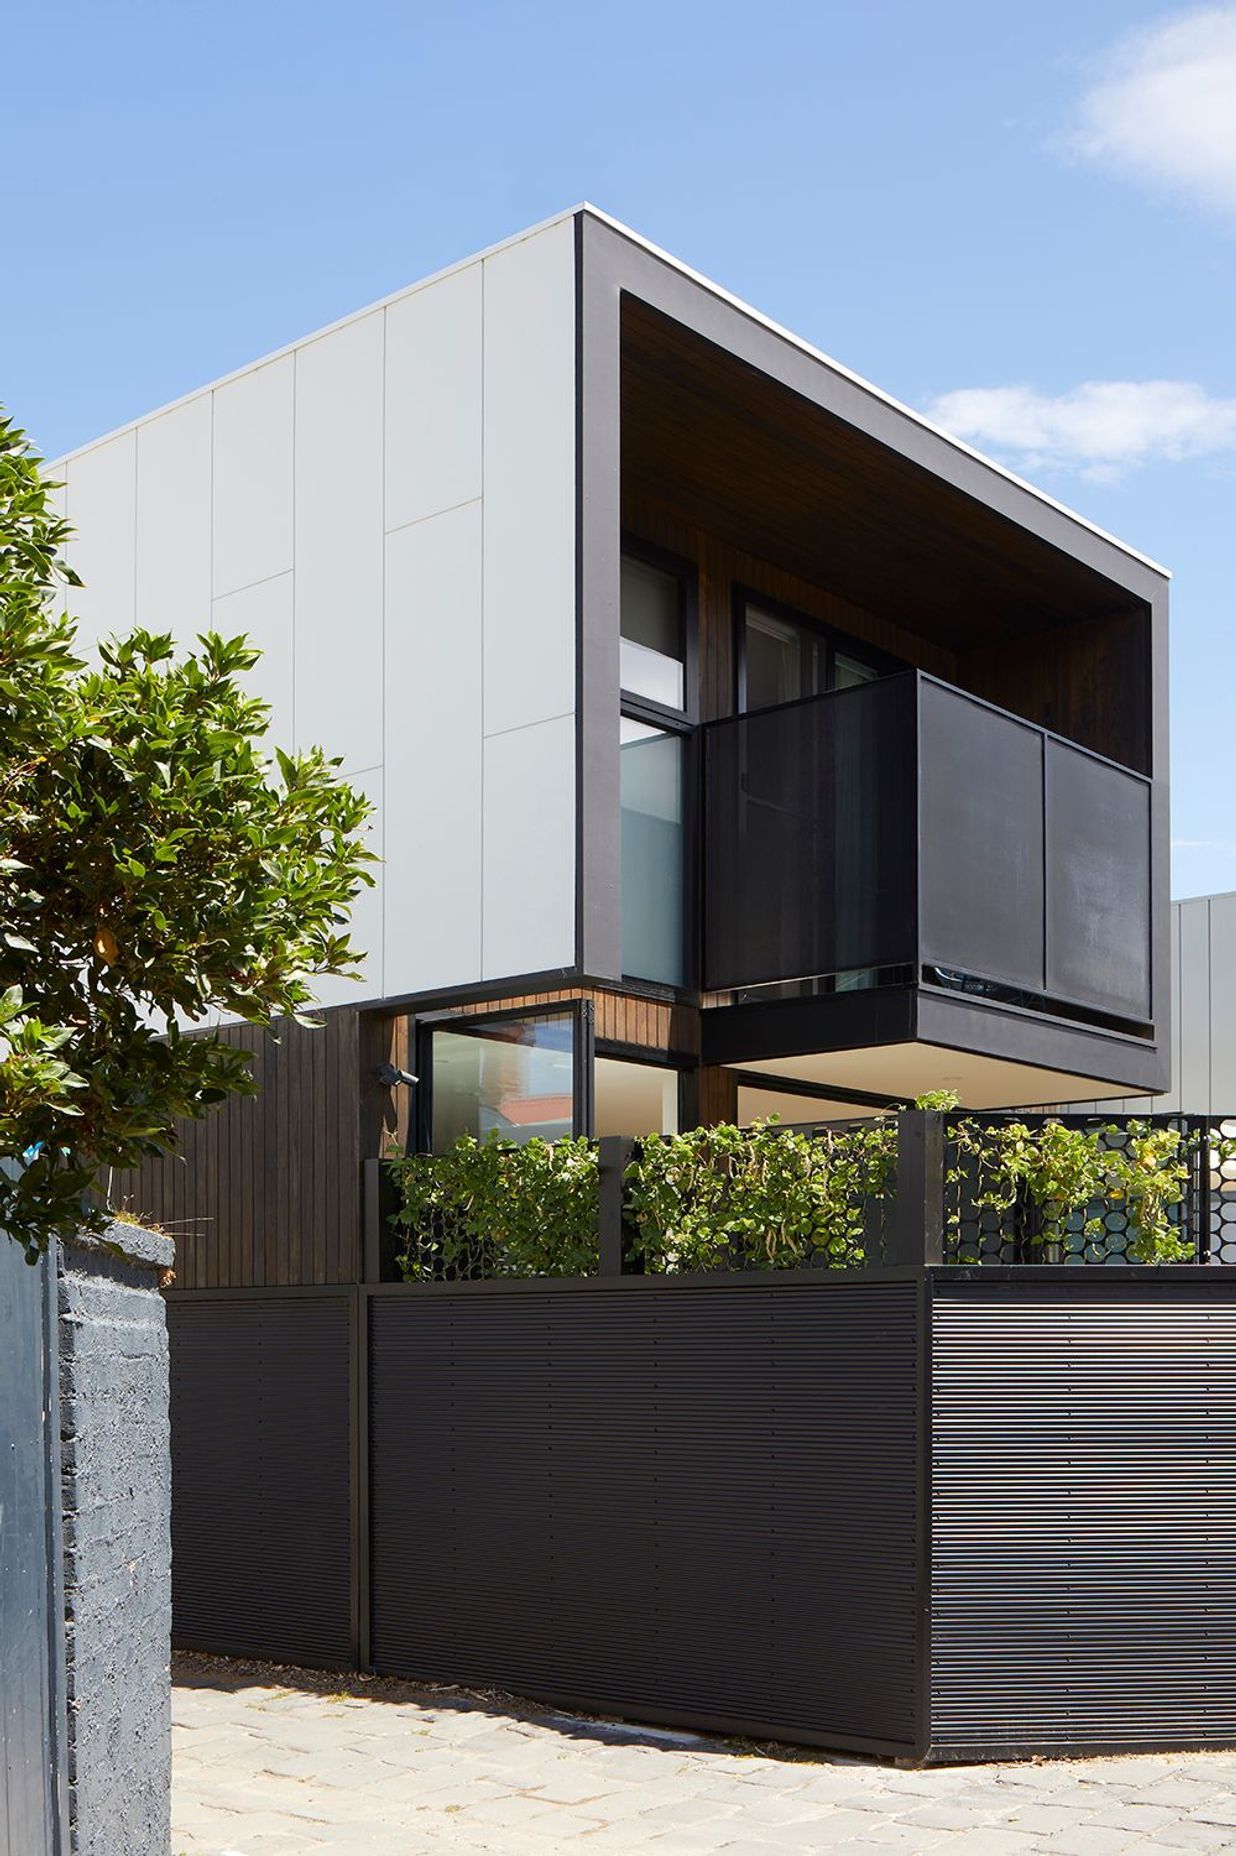 Neville St Residence, Middle Park, by Chan Architecture | Photography by Dave Kulesza